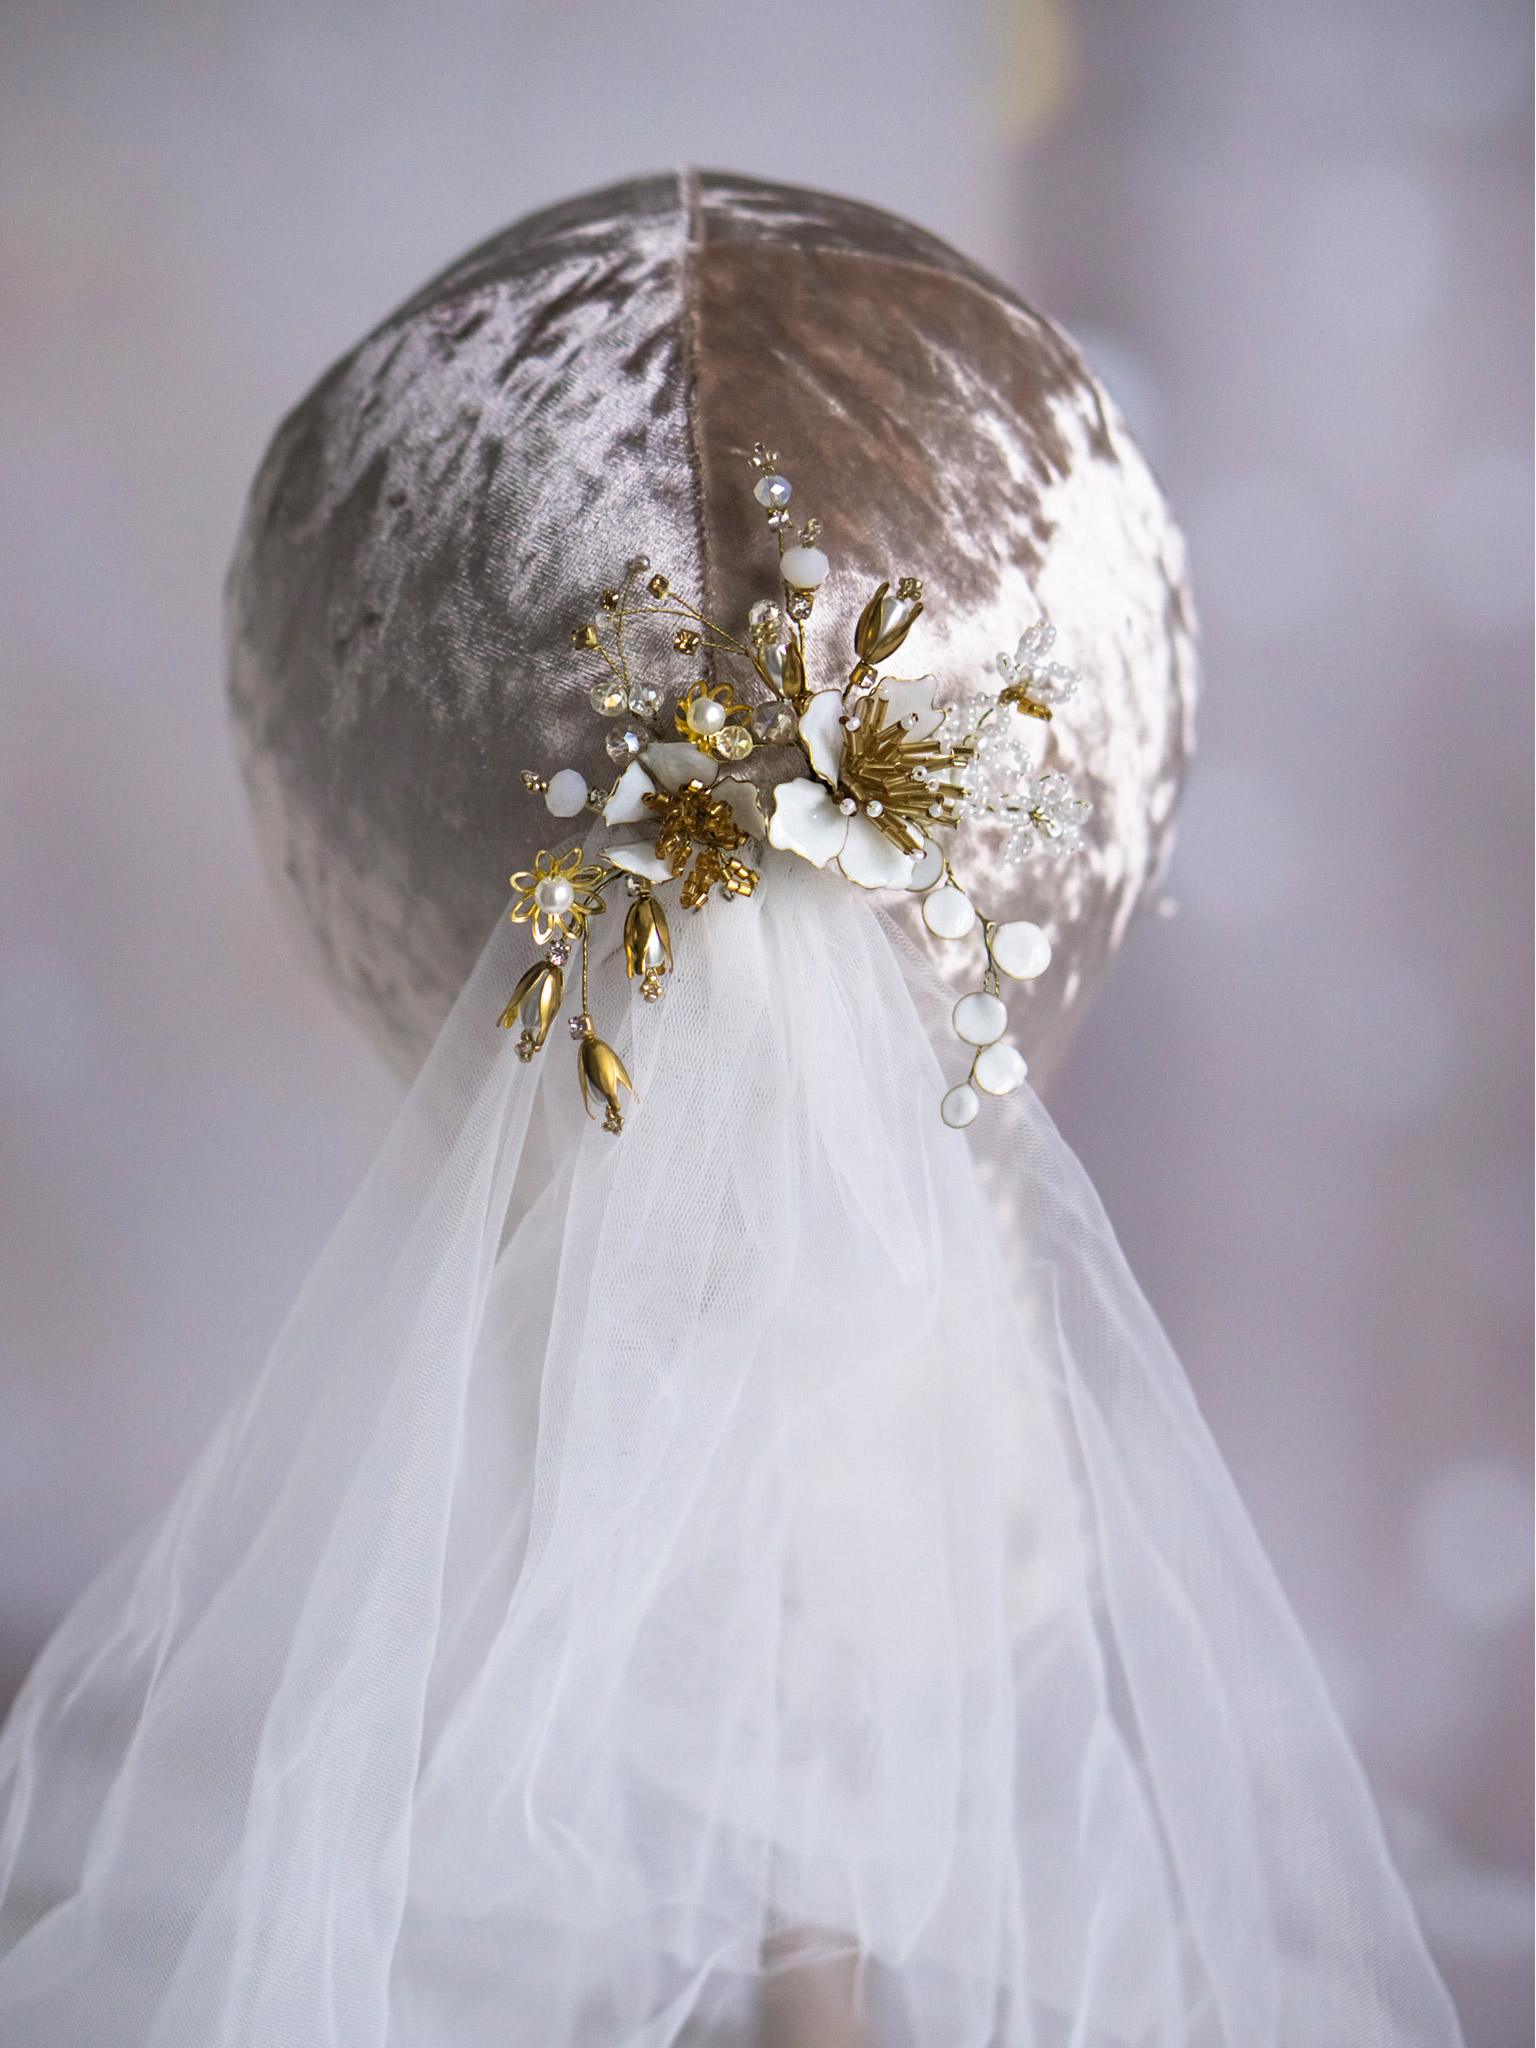 Gold hair pin with delicate white flowers